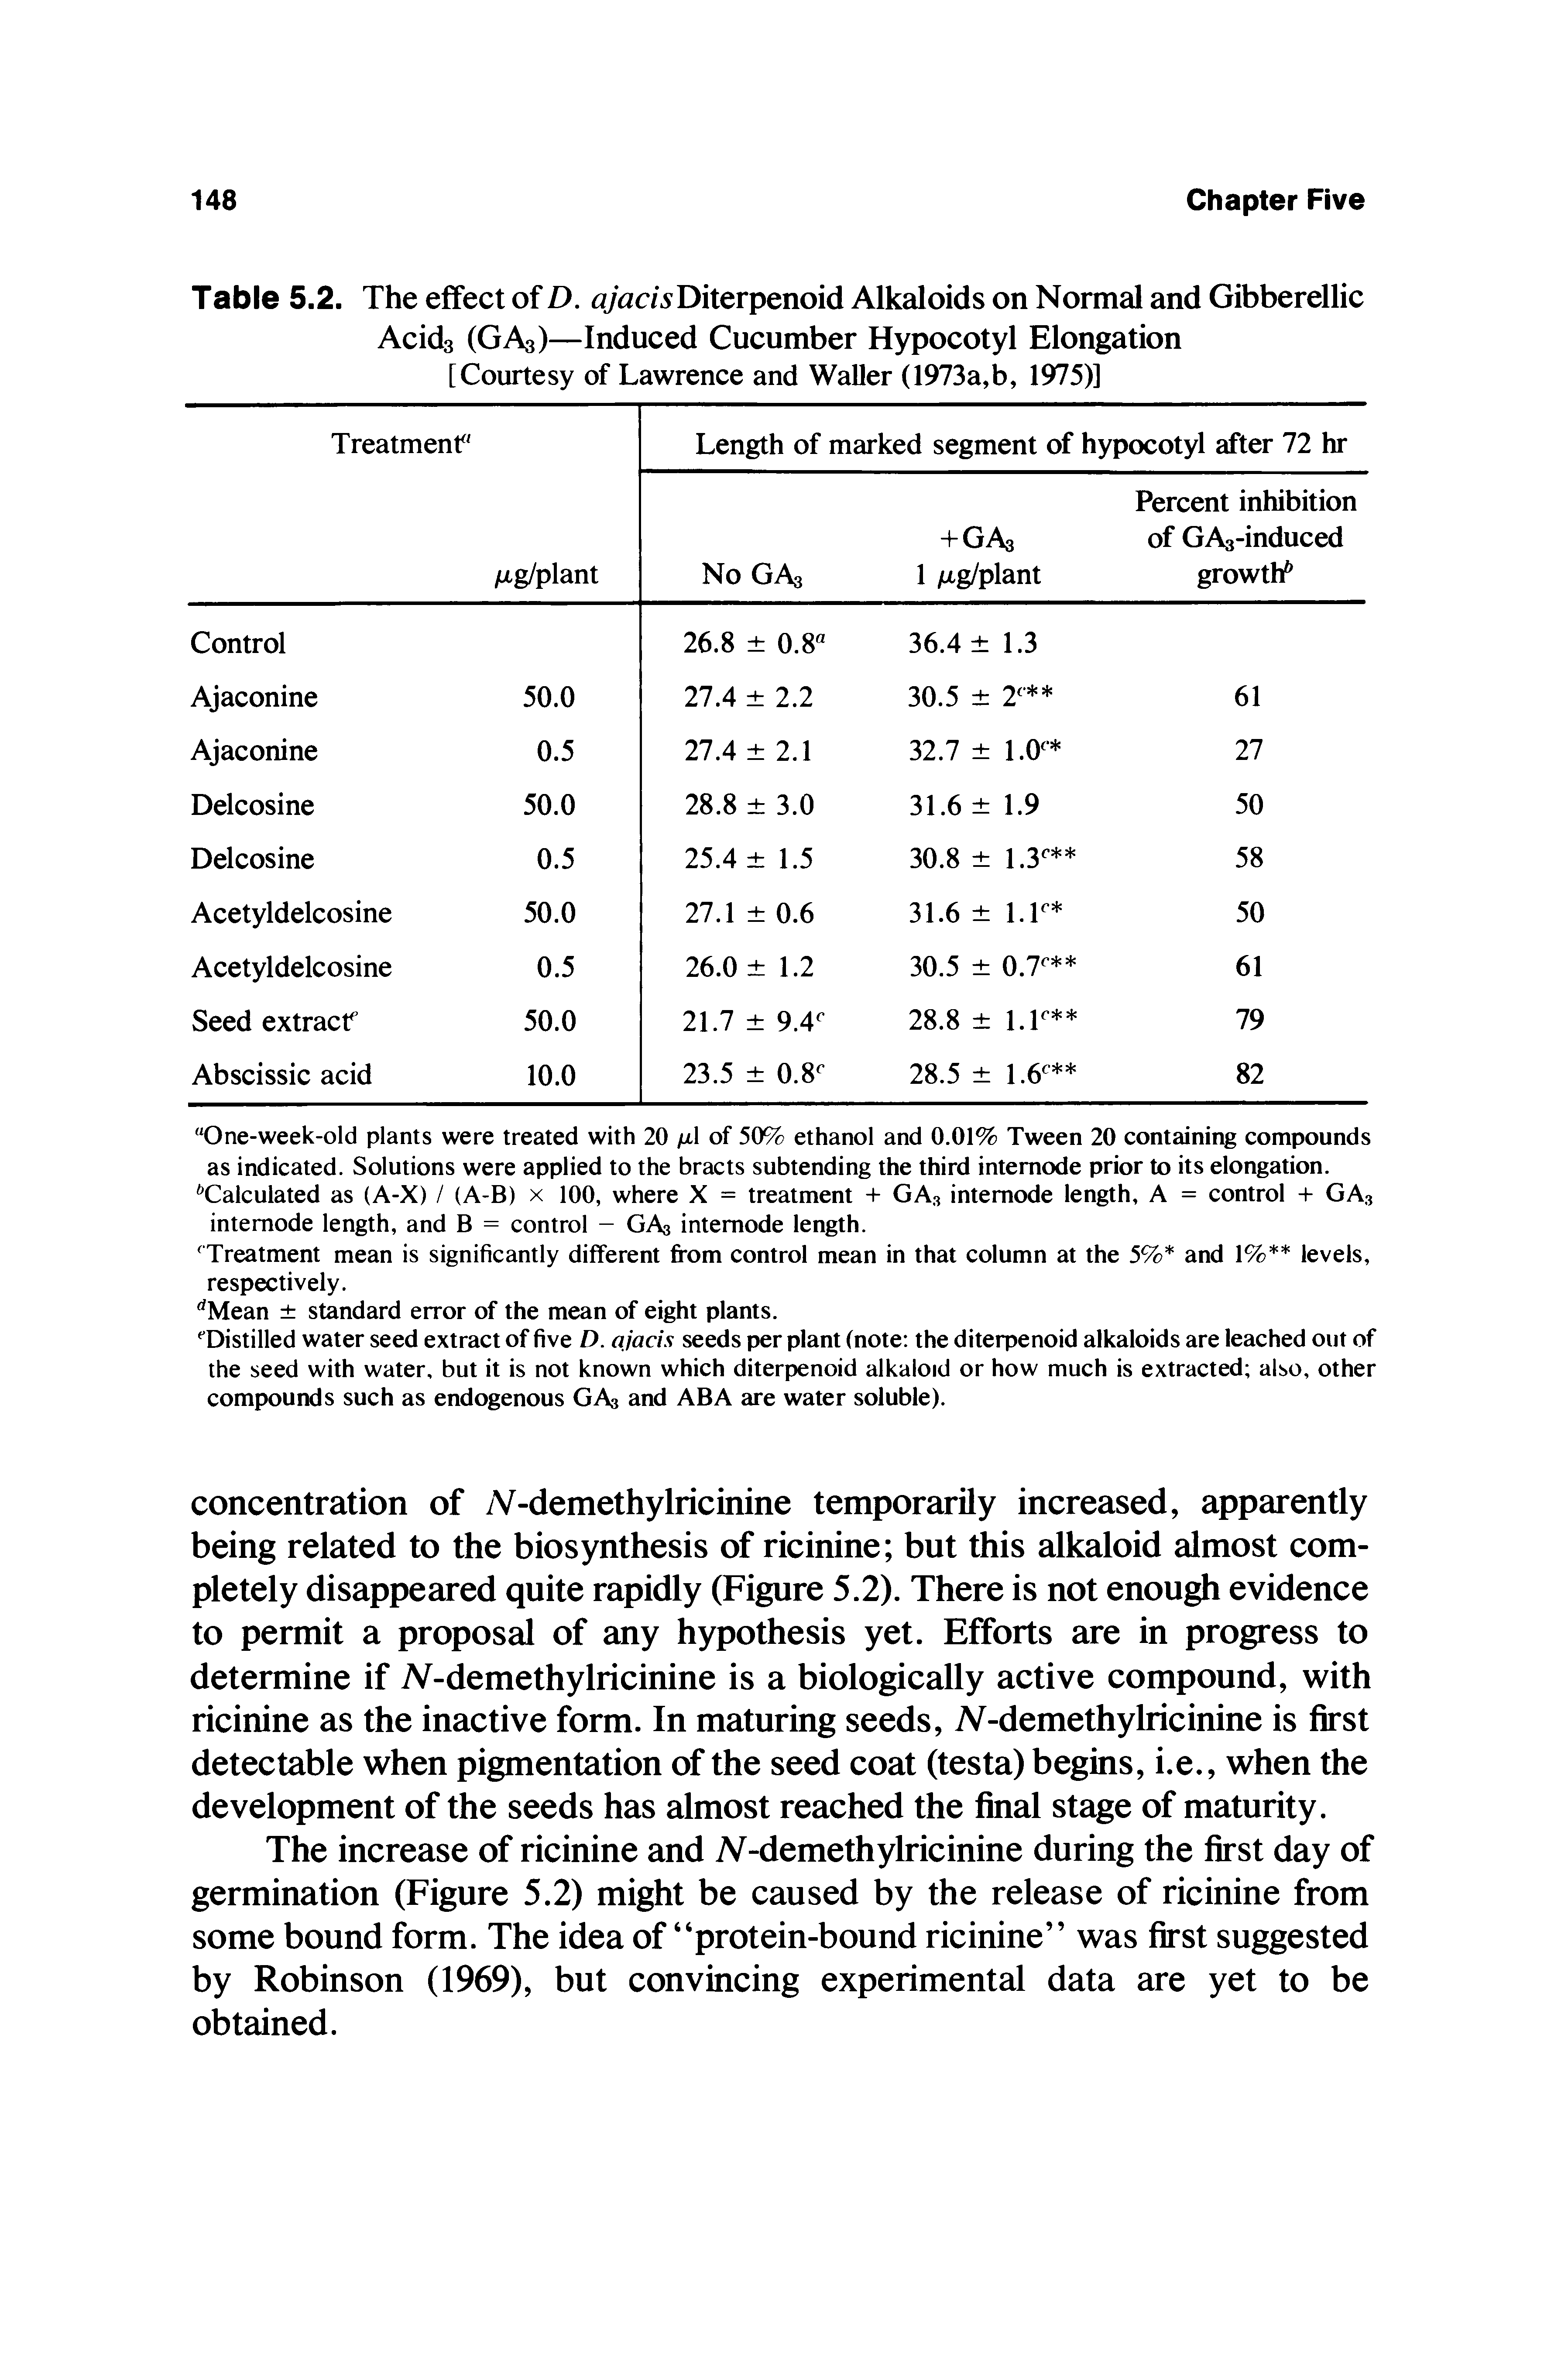 Table 5.2. The effect of D. ajacisDitcrpenoid Alkaloids on Normal and Gibberellic Acids (GAs)—Induced Cucumber Hypocotyl Elongation [Courtesy of Lawrence and Waller (1973a,b, 1975)]...